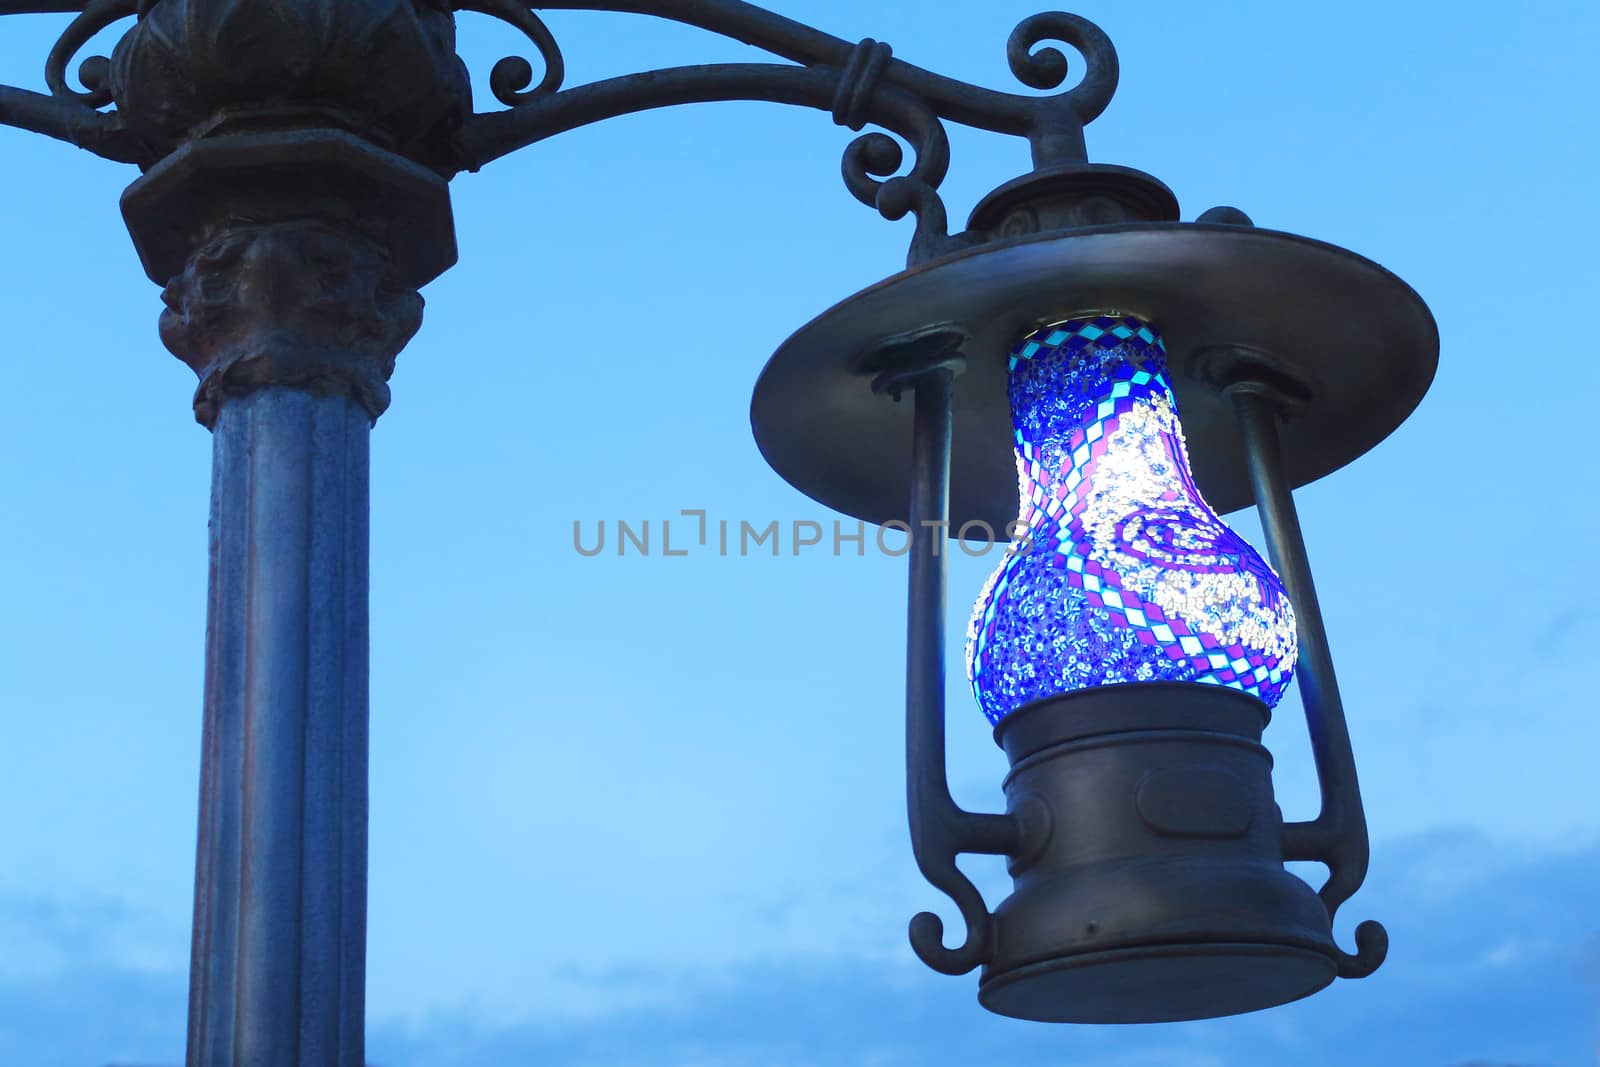 Lamp on a pole on the street, made in the form of antique lamp. Photographed on the background of blue sky.
